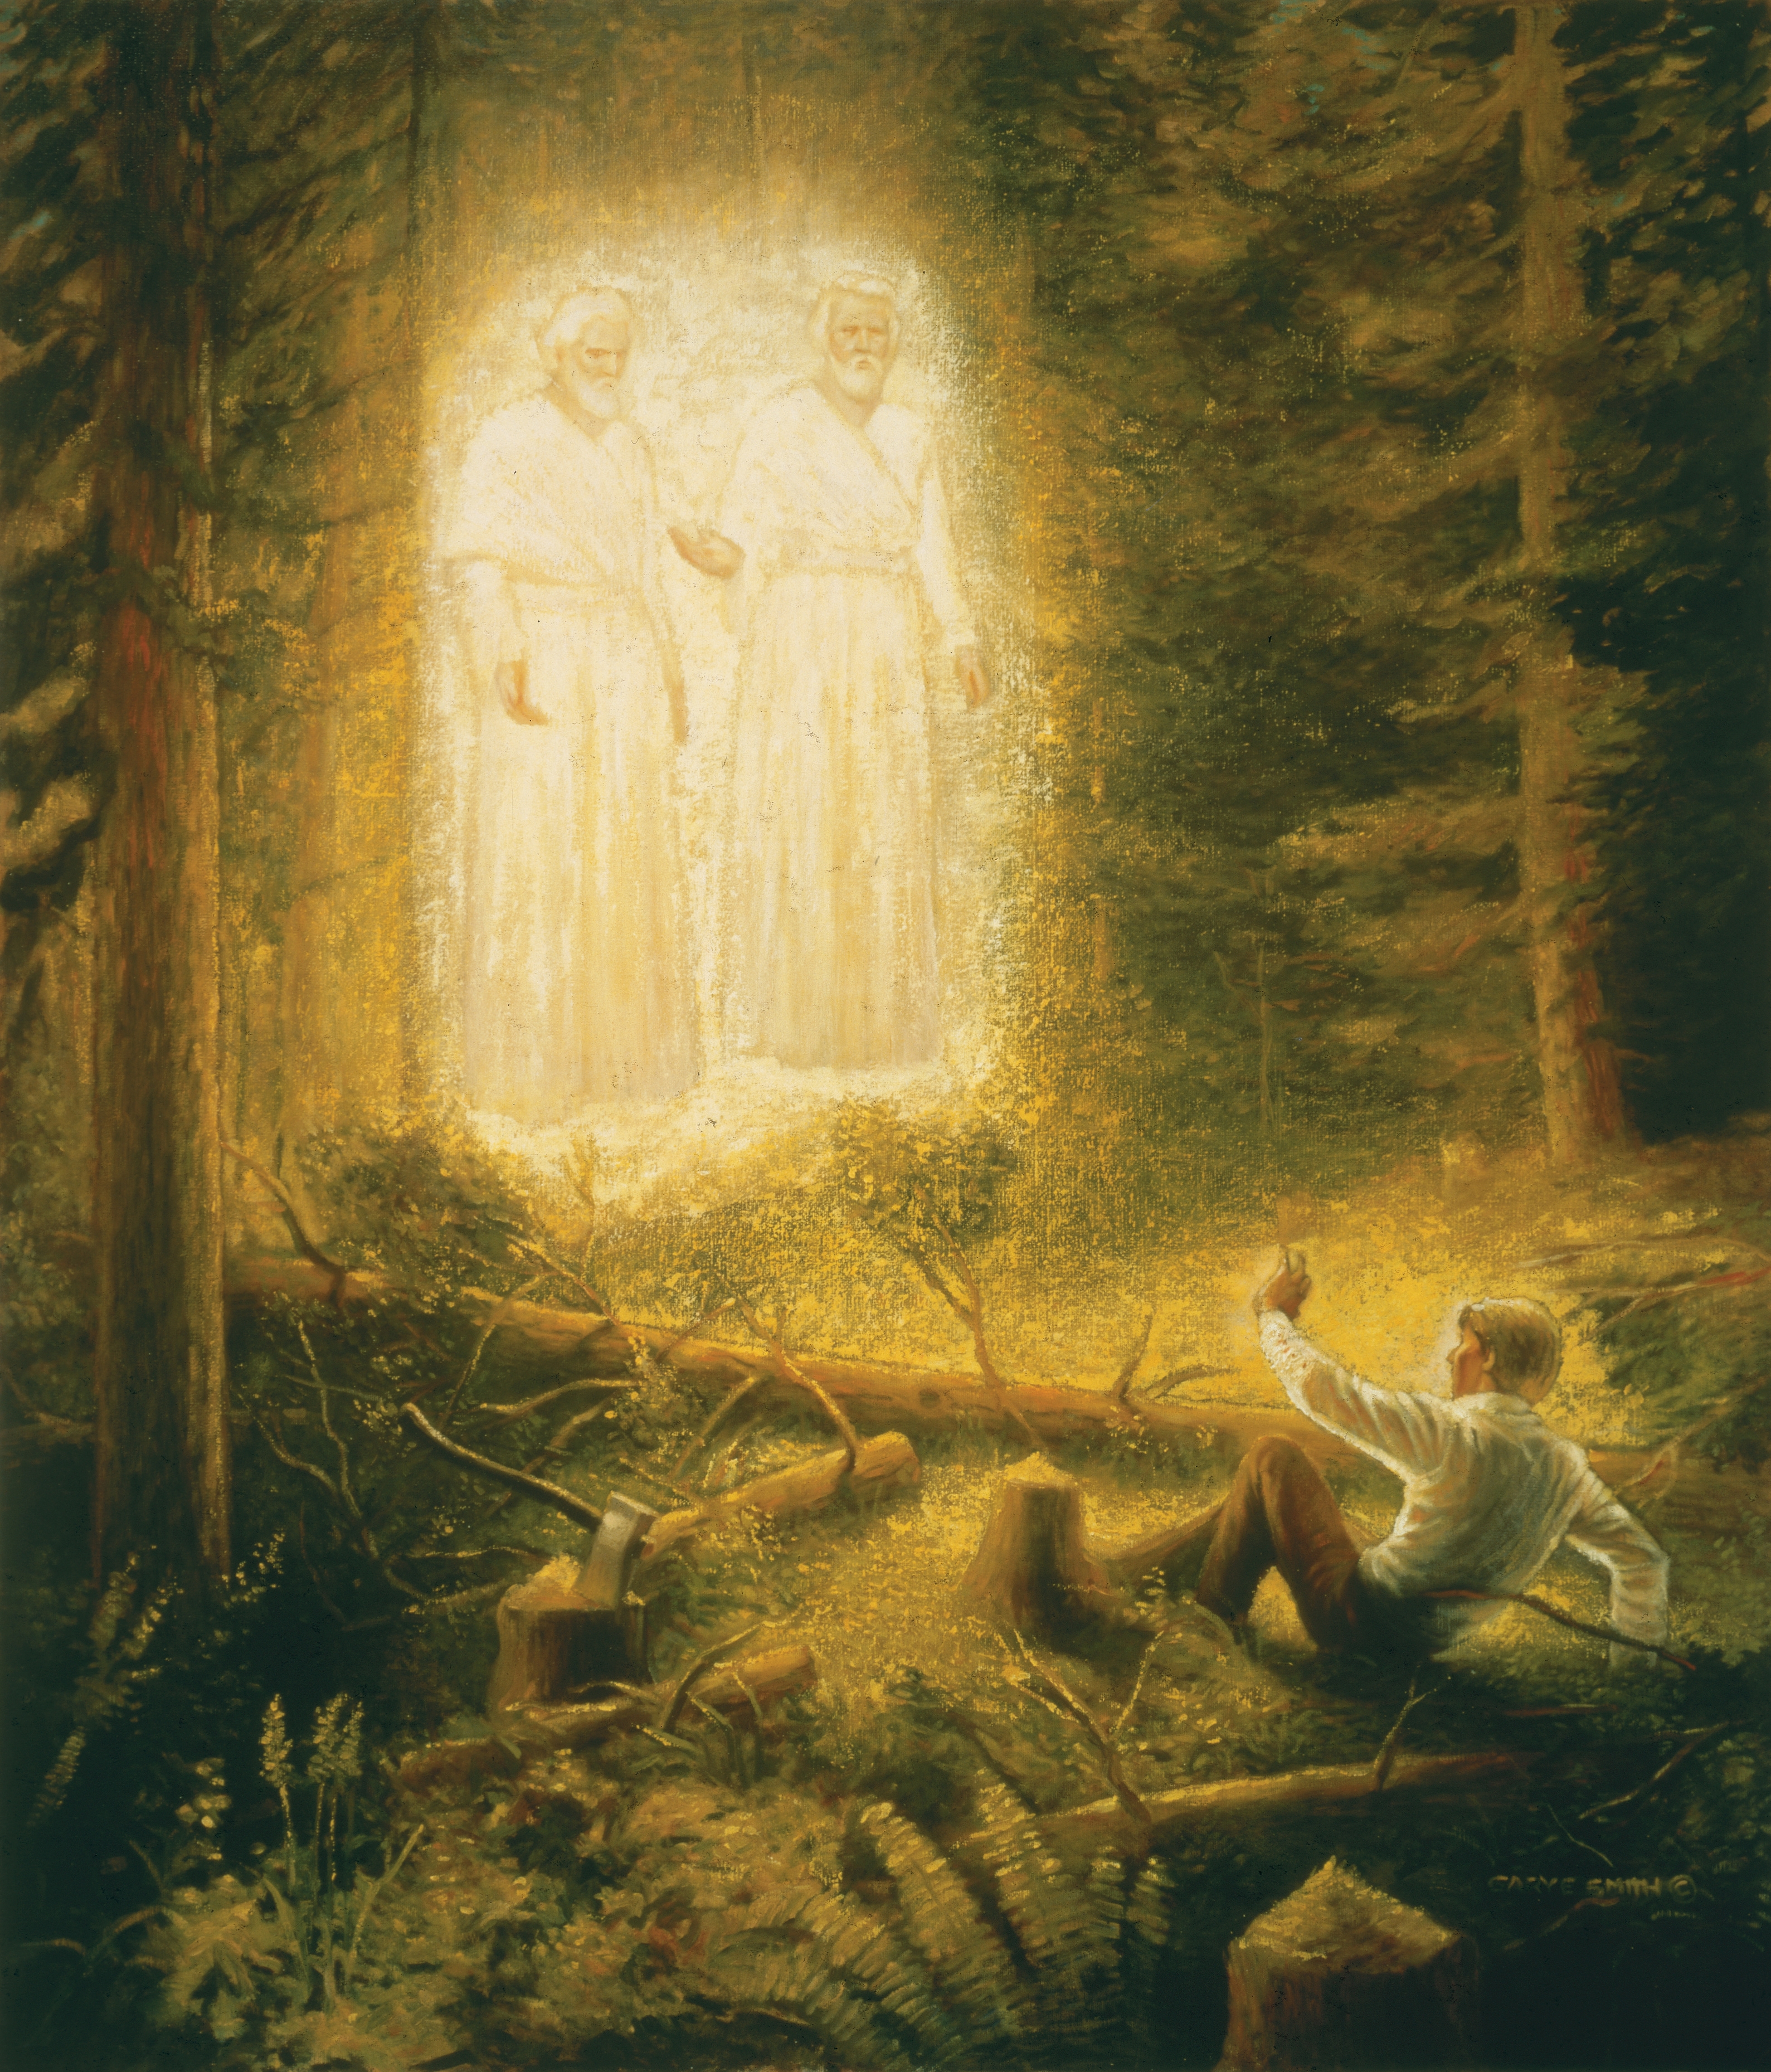 Joseph Smith sitting on the ground in a grove of trees while listening to Jesus Christ and God the Father, who are standing above the ground.